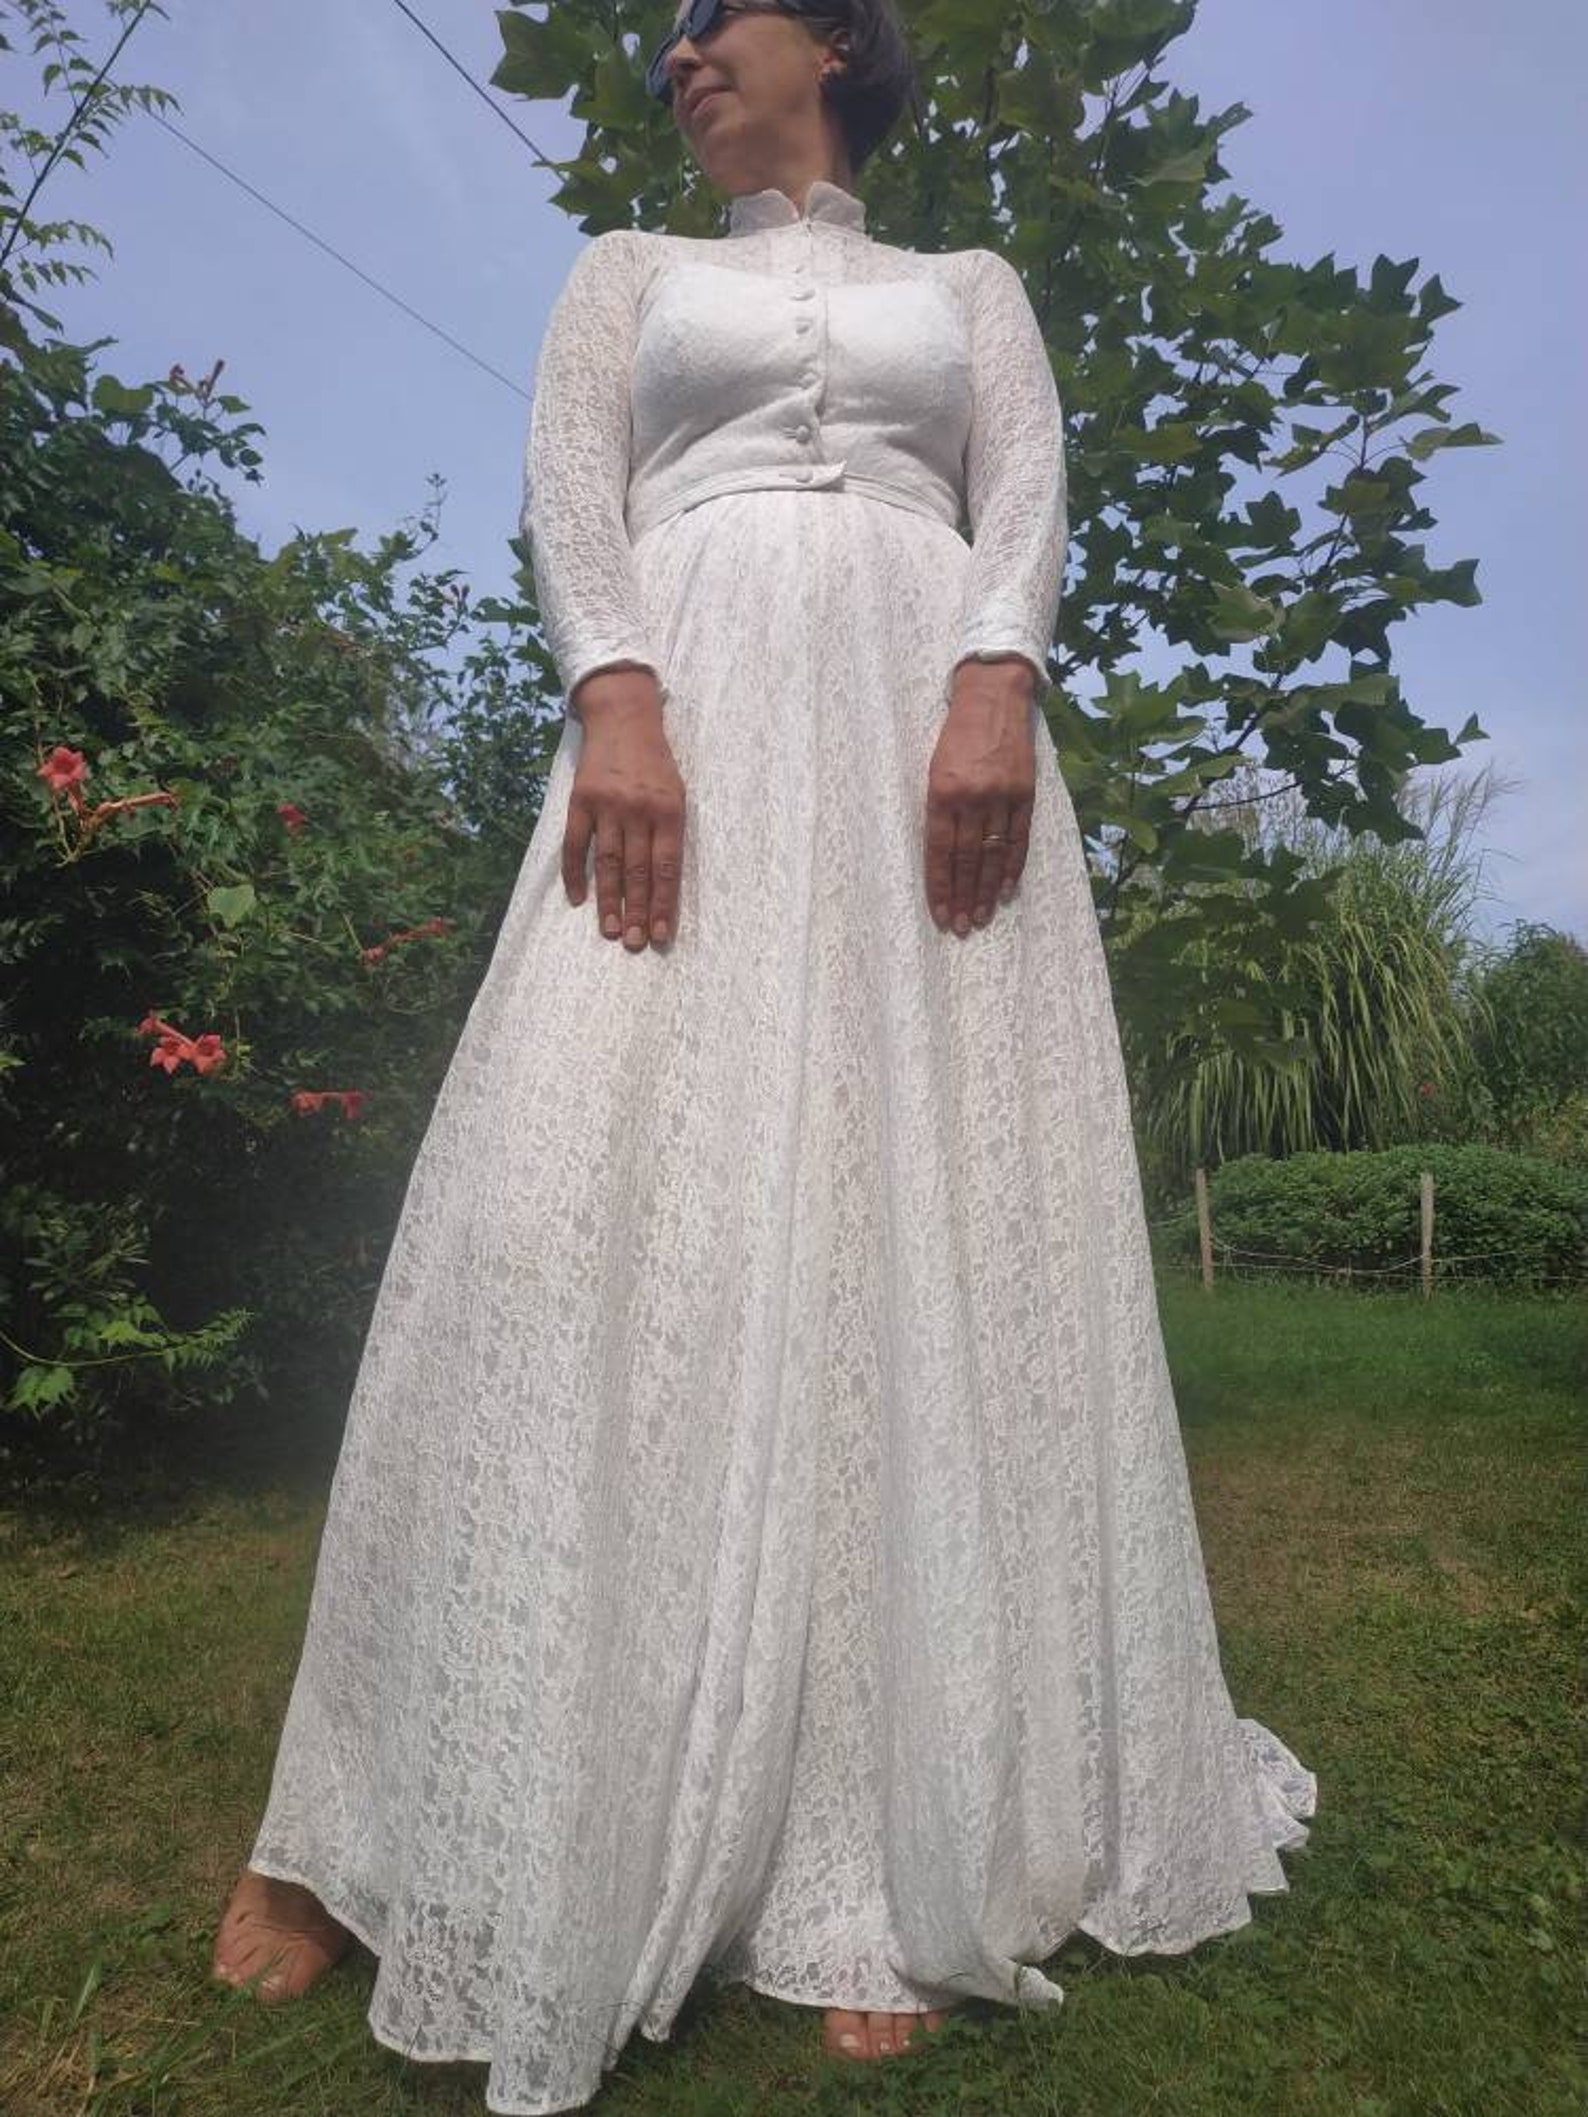 Vintage 70s Wedding Gown. Long Sleeve Lace Wedding Dress. S/M - Etsy